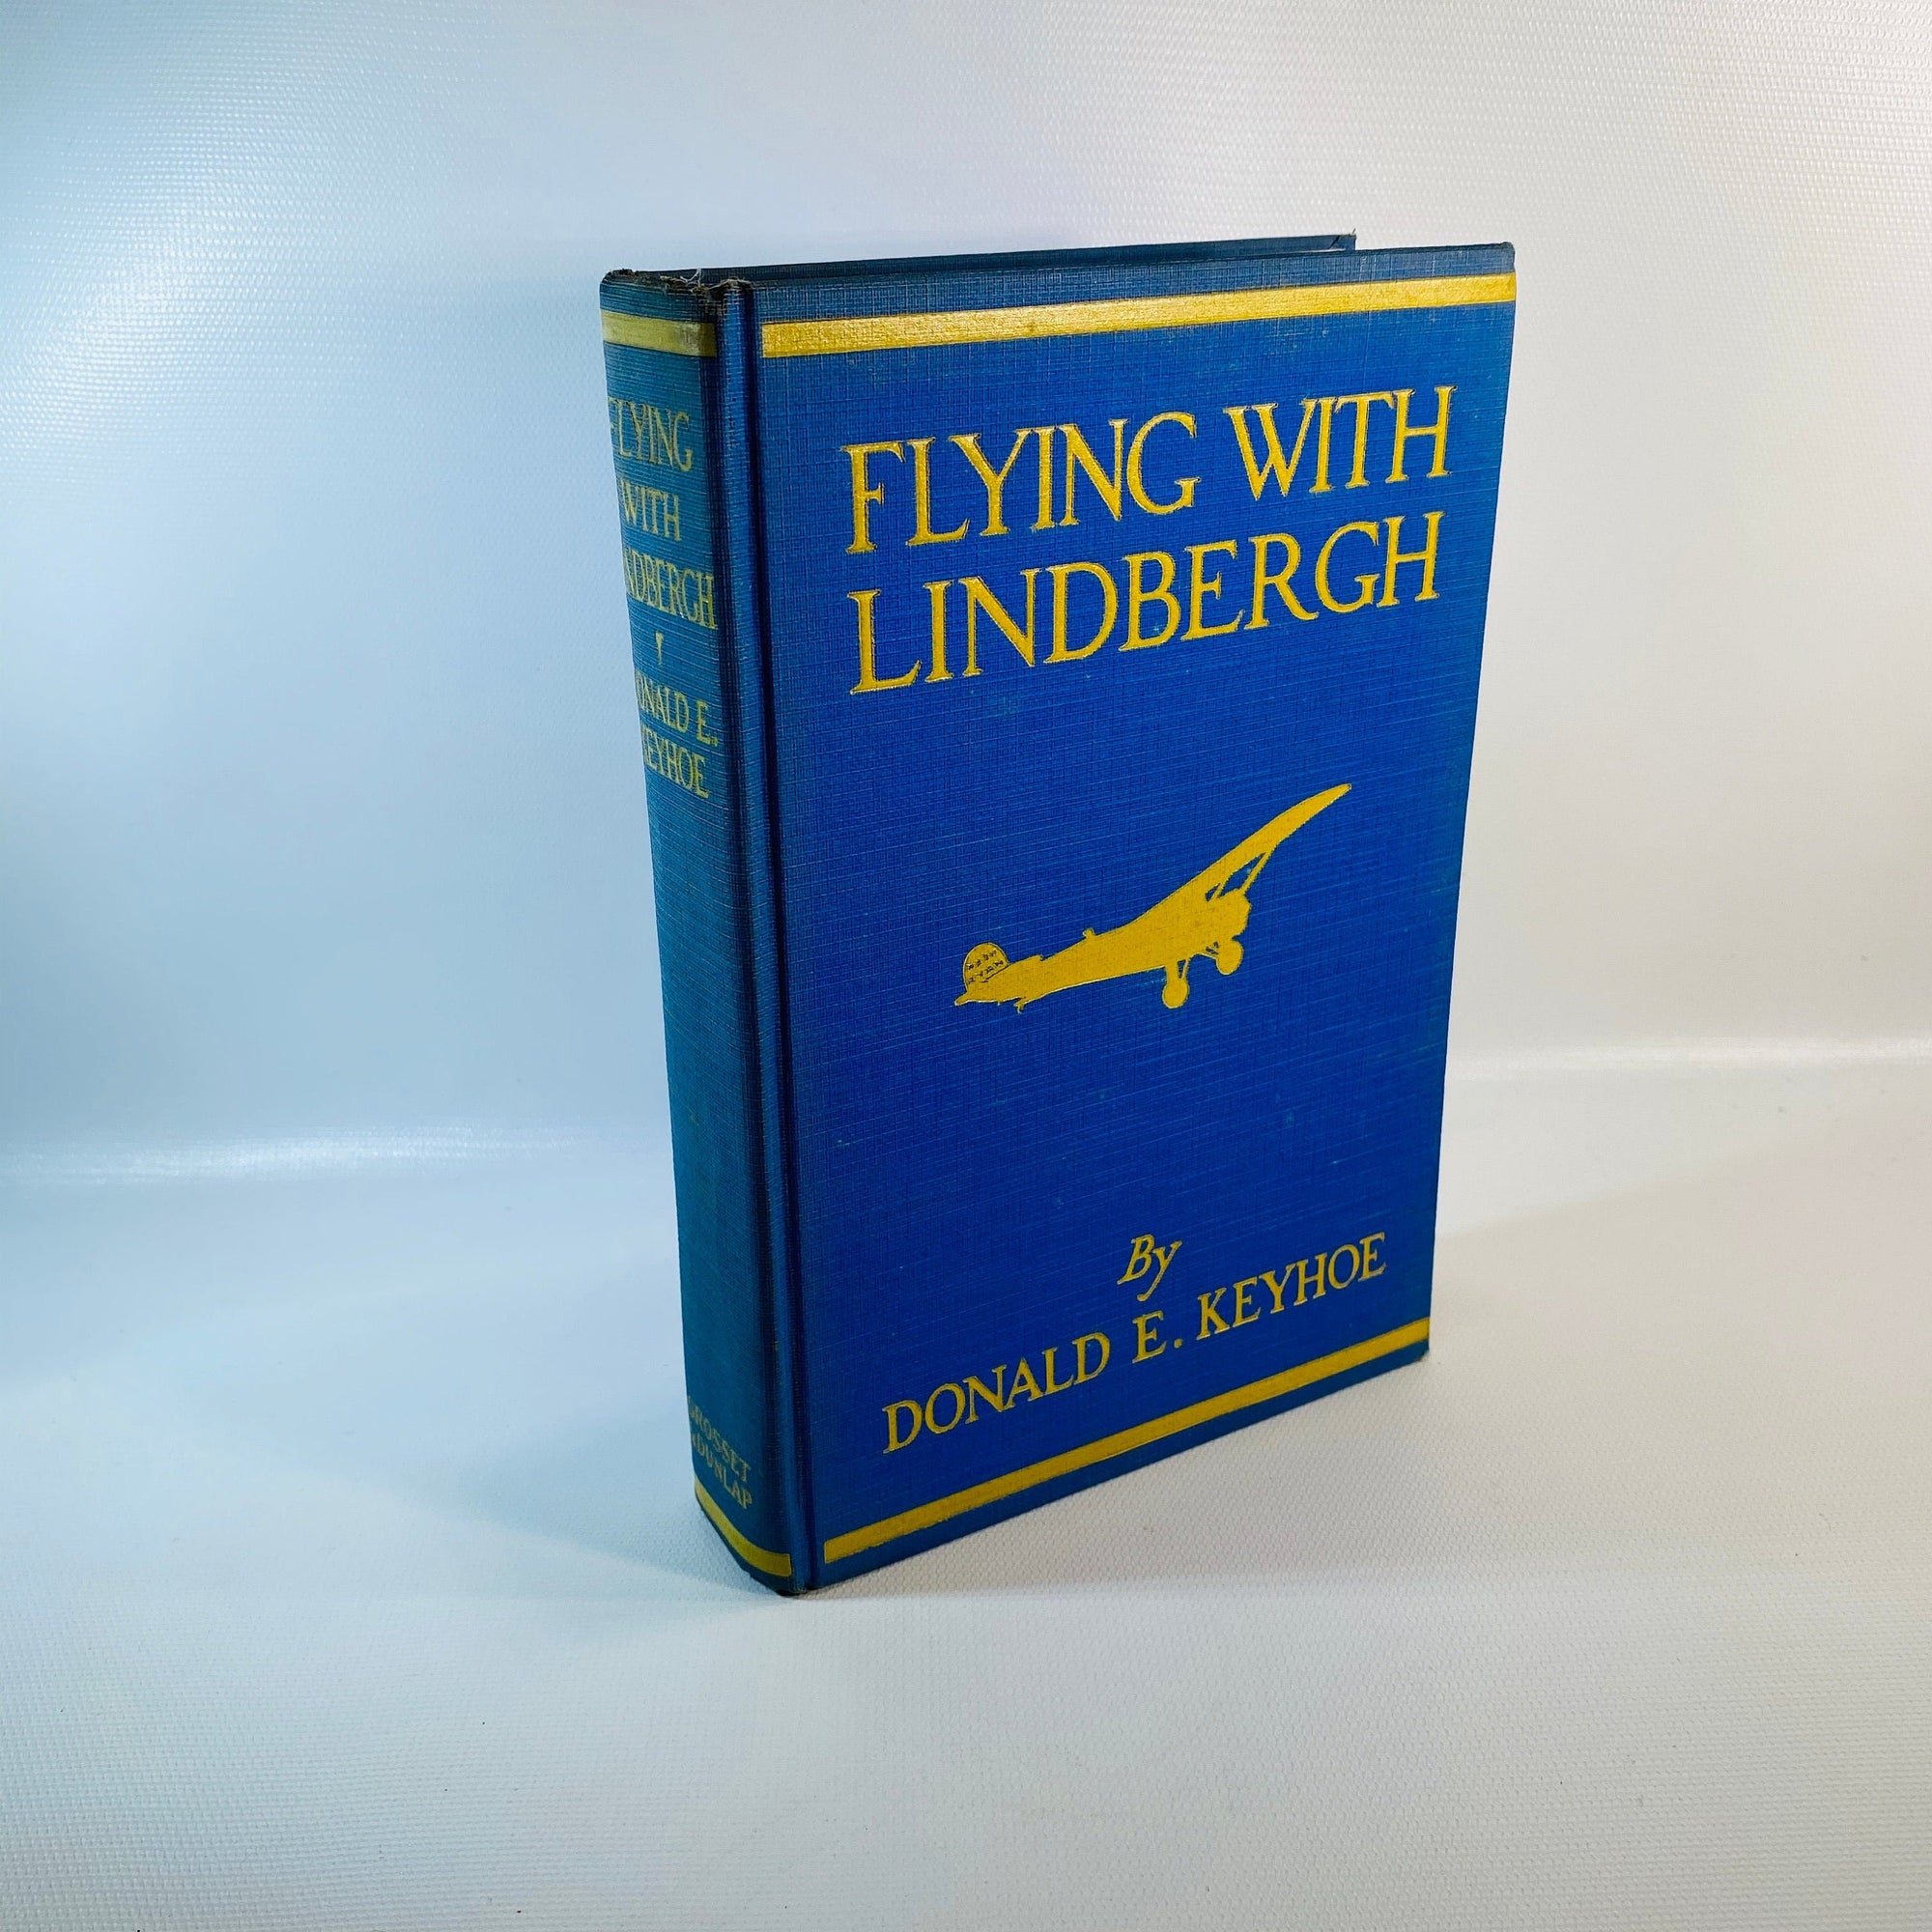 Flying with Lindbergh by Donald E. Keyhoe 1929 Vintage Book